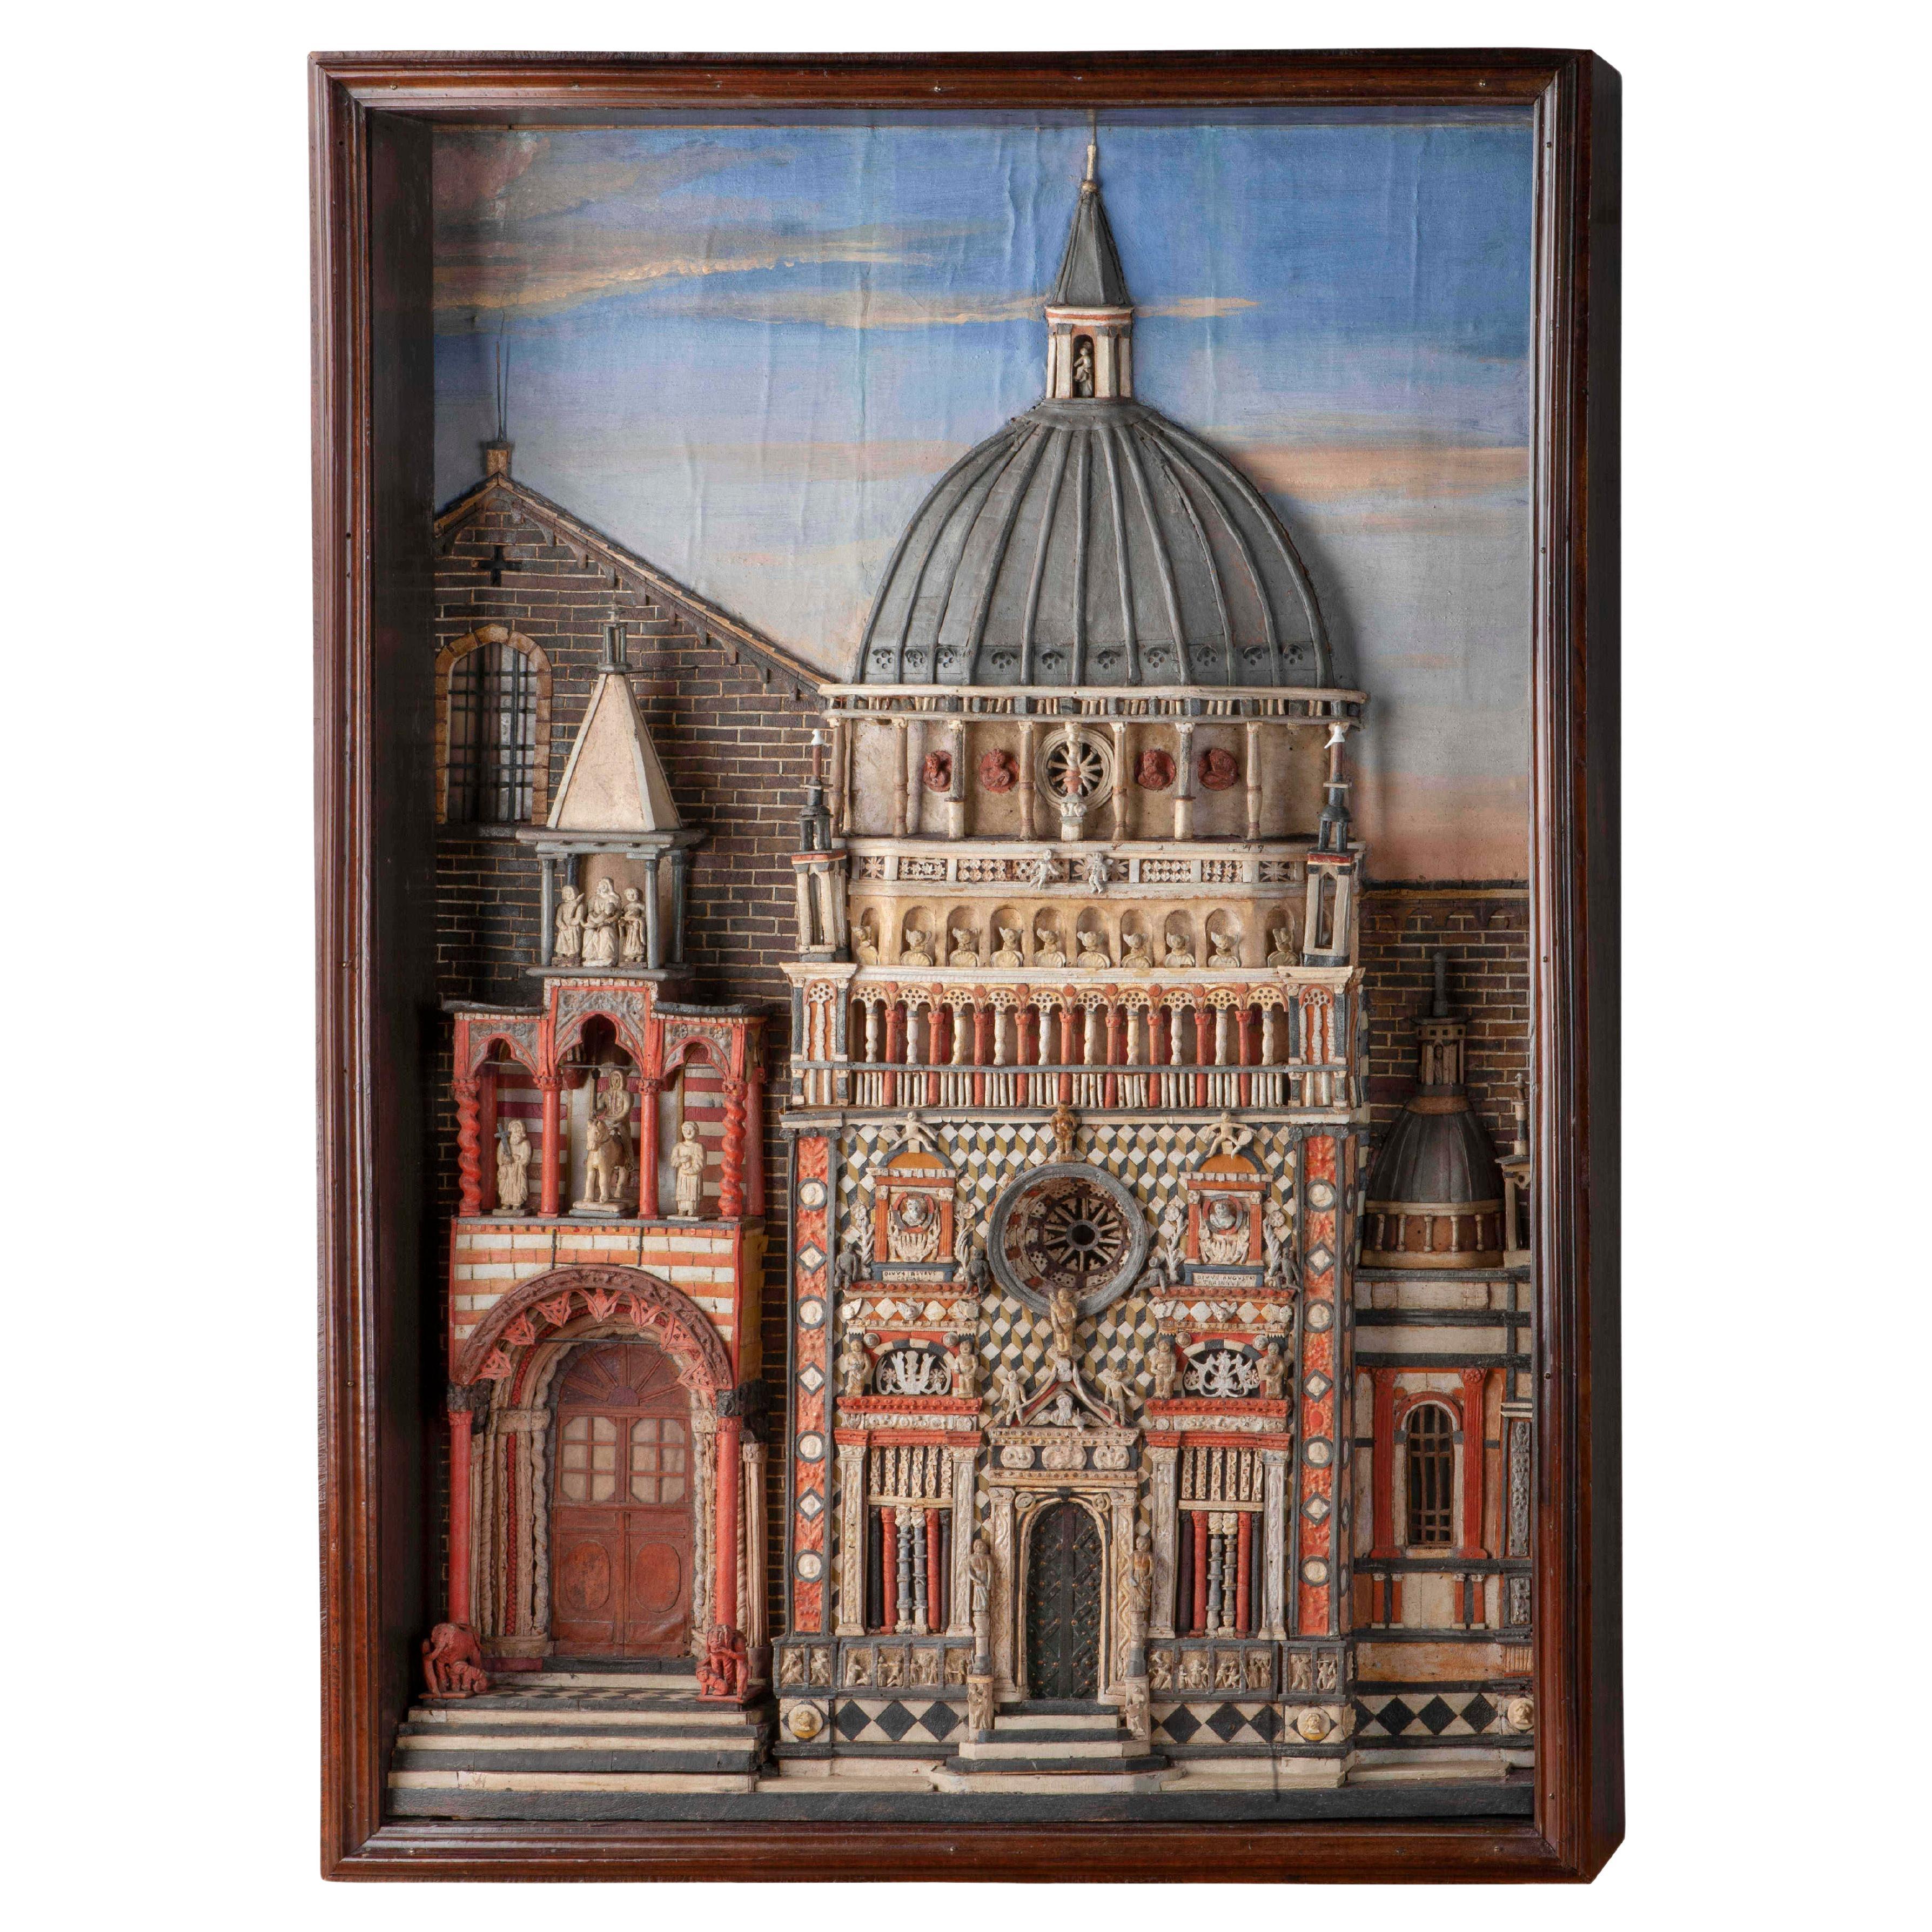 The Colleoni Chapel - Model made of wood, paper, tablet and various materials. For Sale